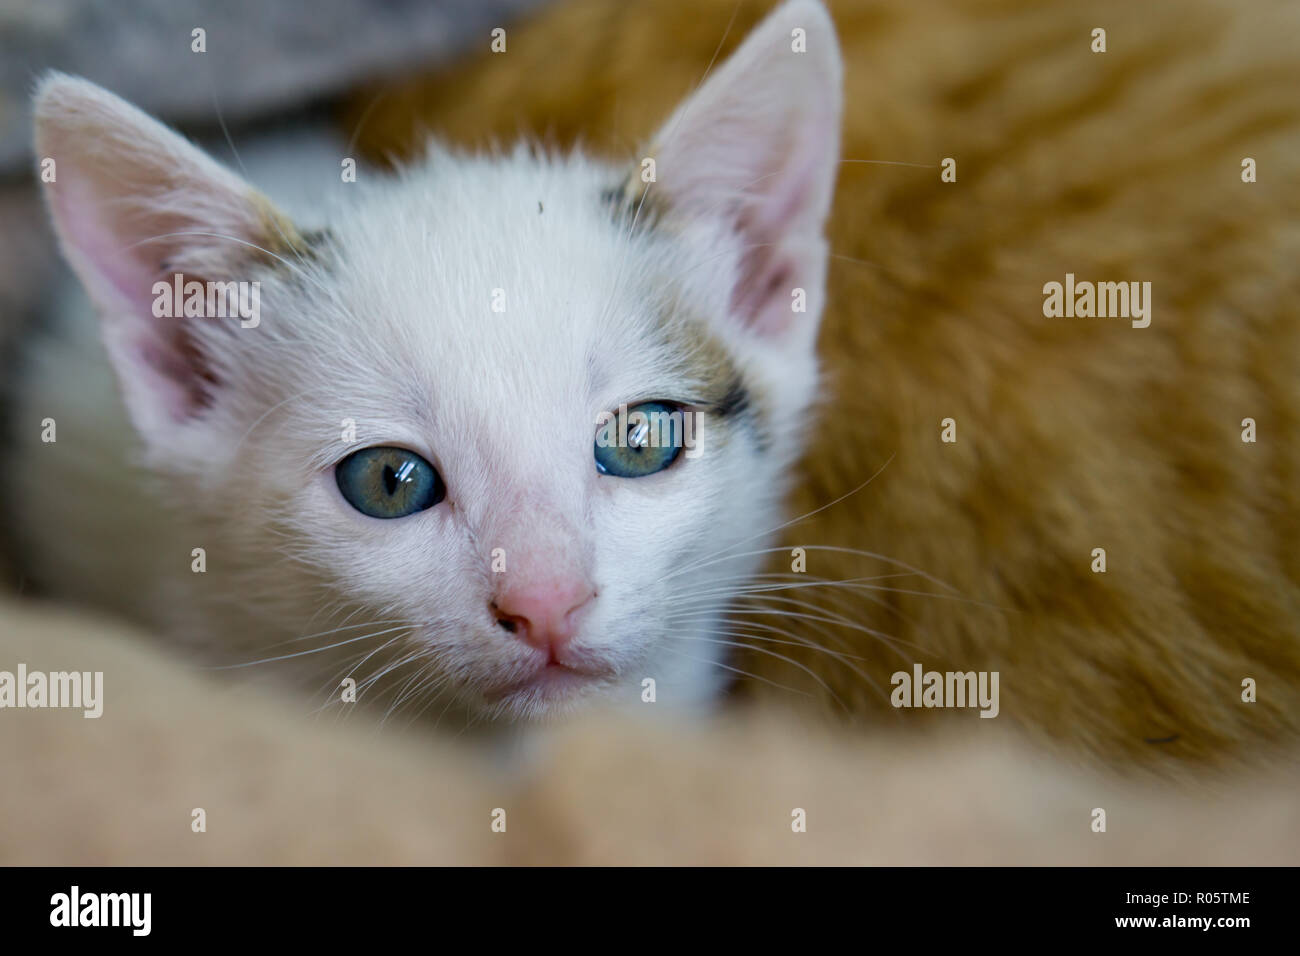 Little white cat lay with yellow cat in background Stock Photo